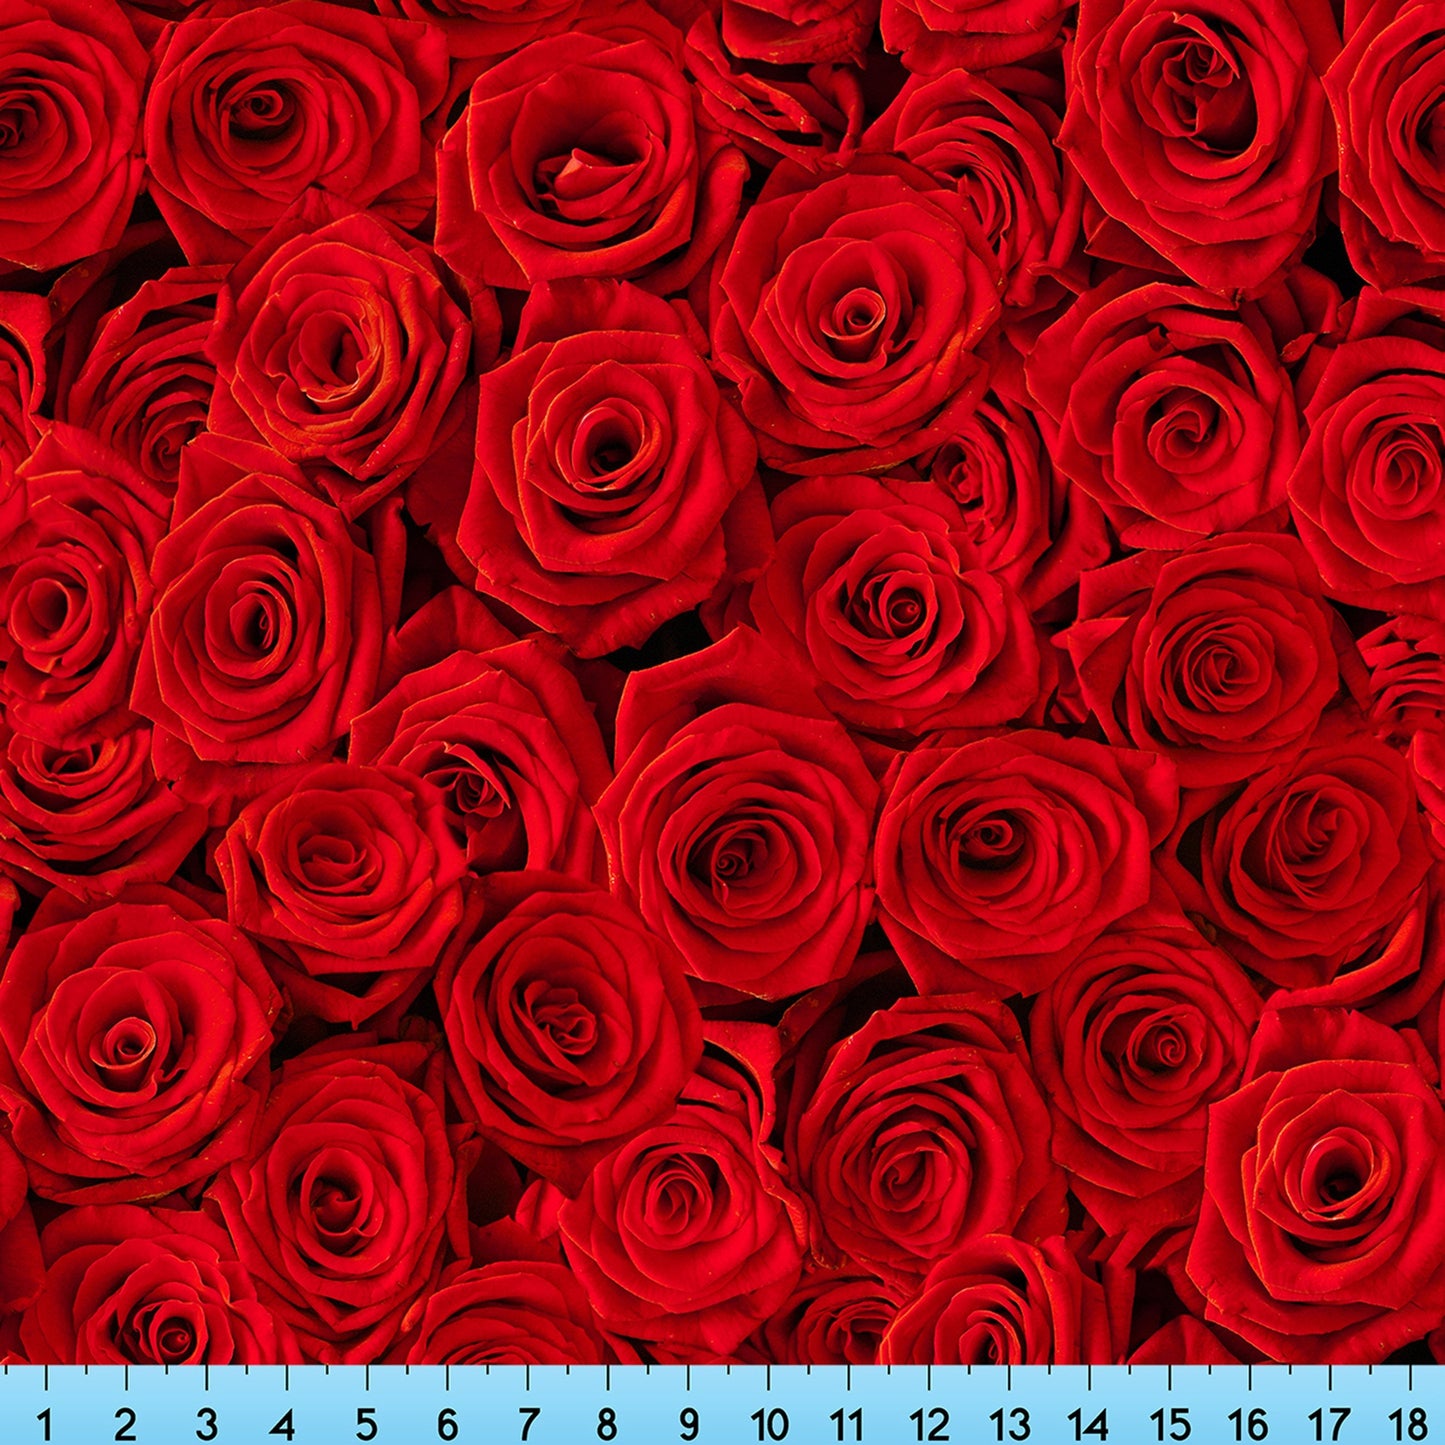 Red Roses Fabric By The Yard, Realistic Red Roses Fabric Printed on the fabric of your choice of Fabrics